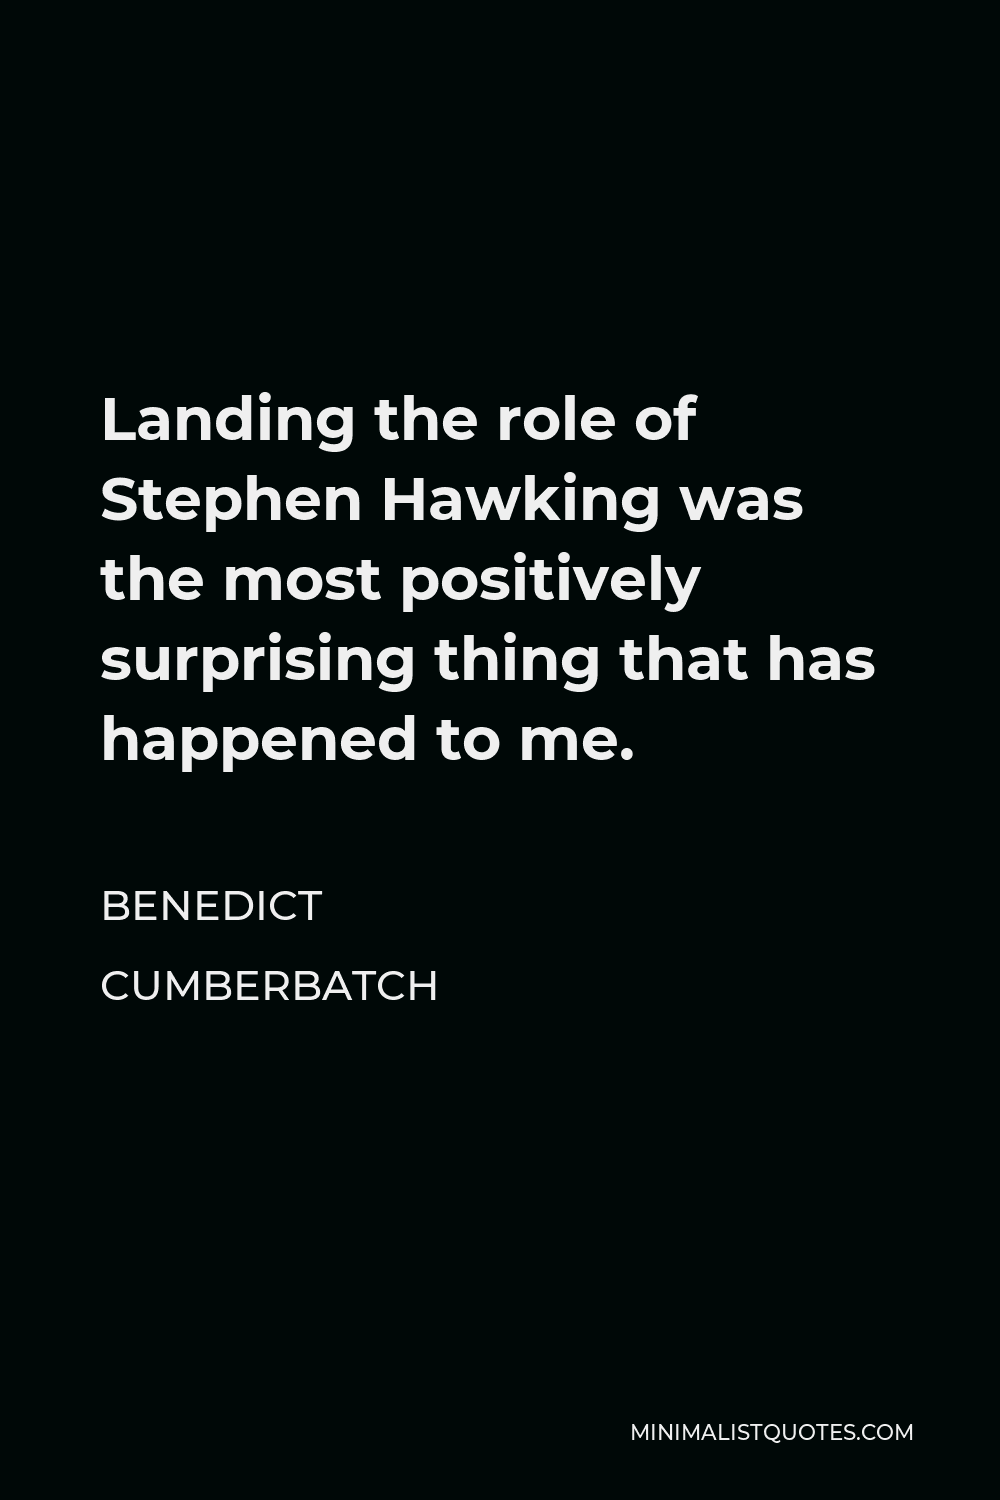 Benedict Cumberbatch Quote - Landing the role of Stephen Hawking was the most positively surprising thing that has happened to me.